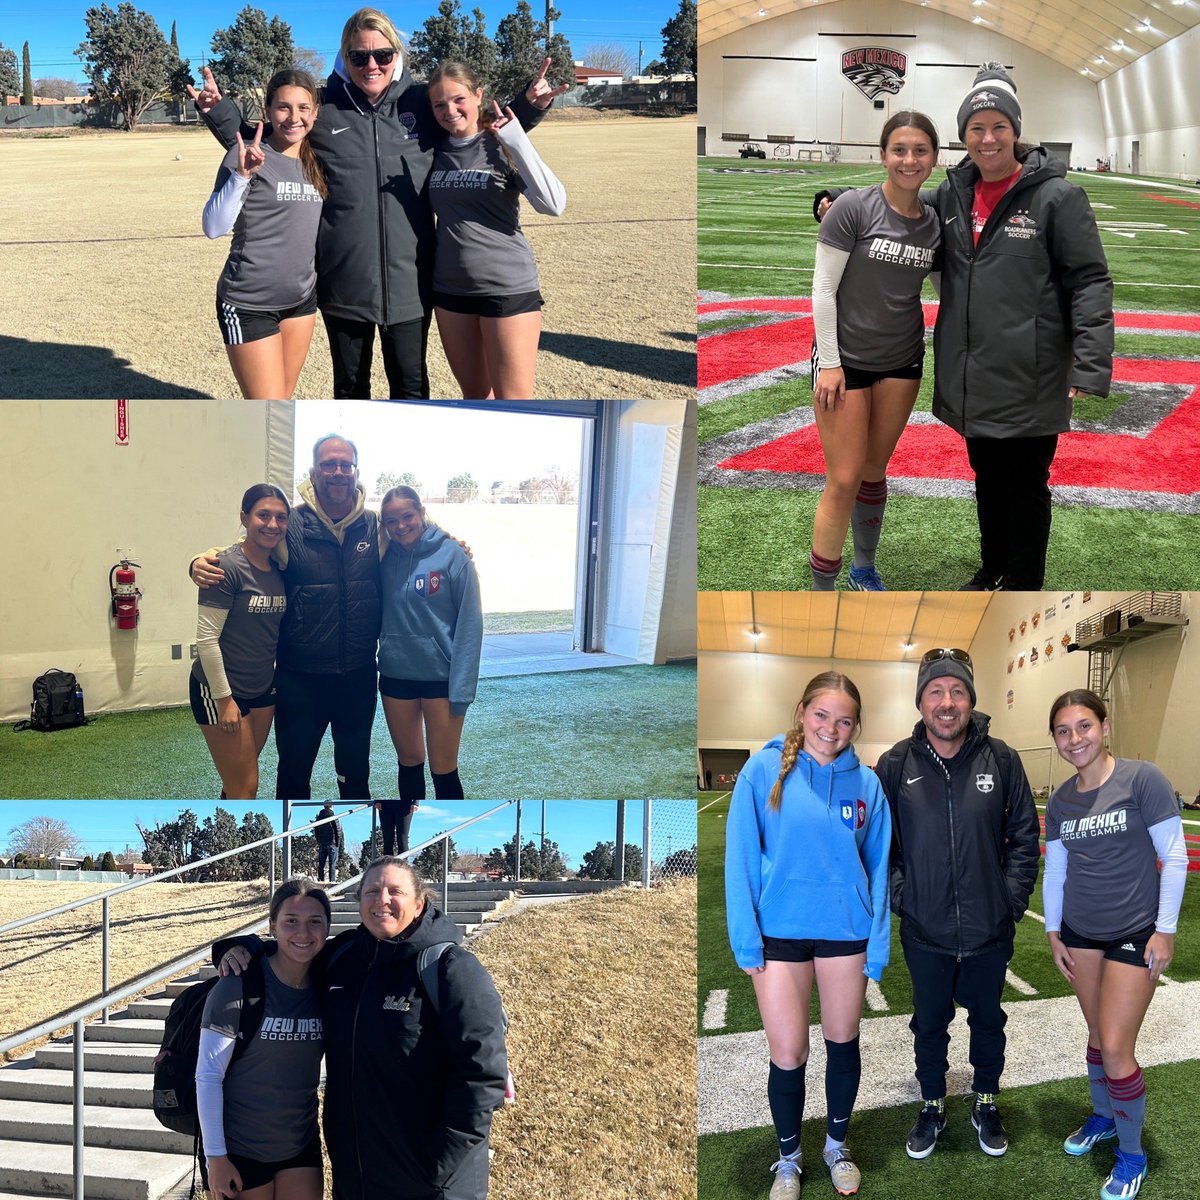 Fun weekend! Thank you @UNMLoboWSoccer for hosting an amazing ID camp and to the 8 other schools who attended! Had such an amazing time working with each coach and playing.